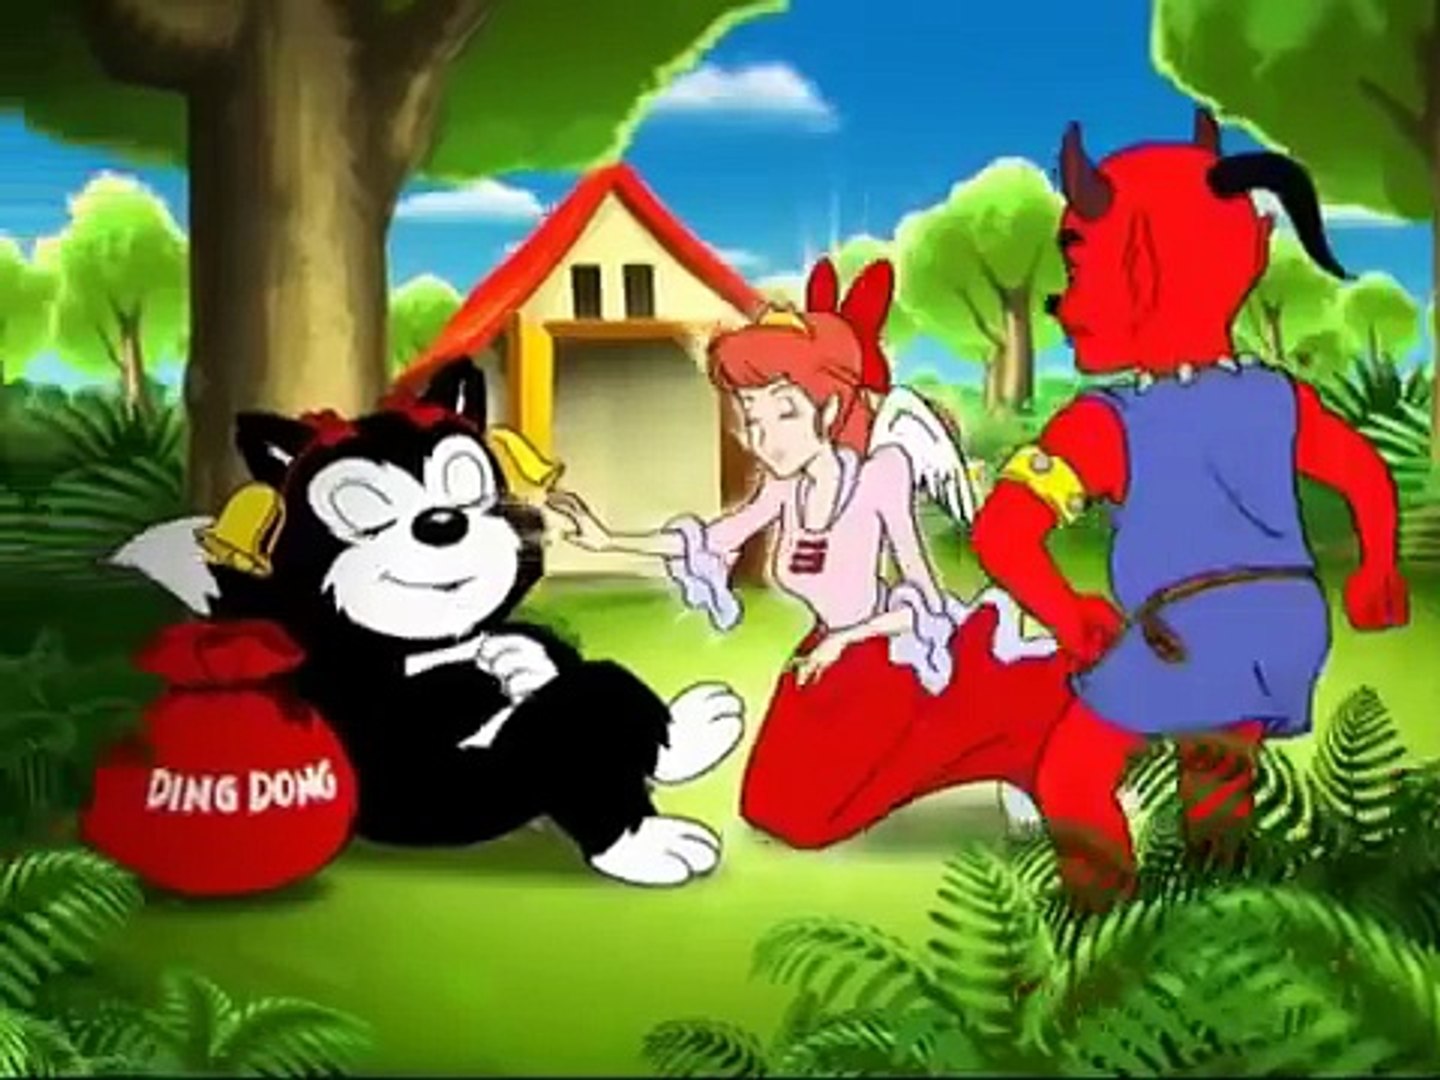 Ding Dong story 8 The Gini & the Ding Dong Cat From The House of HILAL -  video Dailymotion